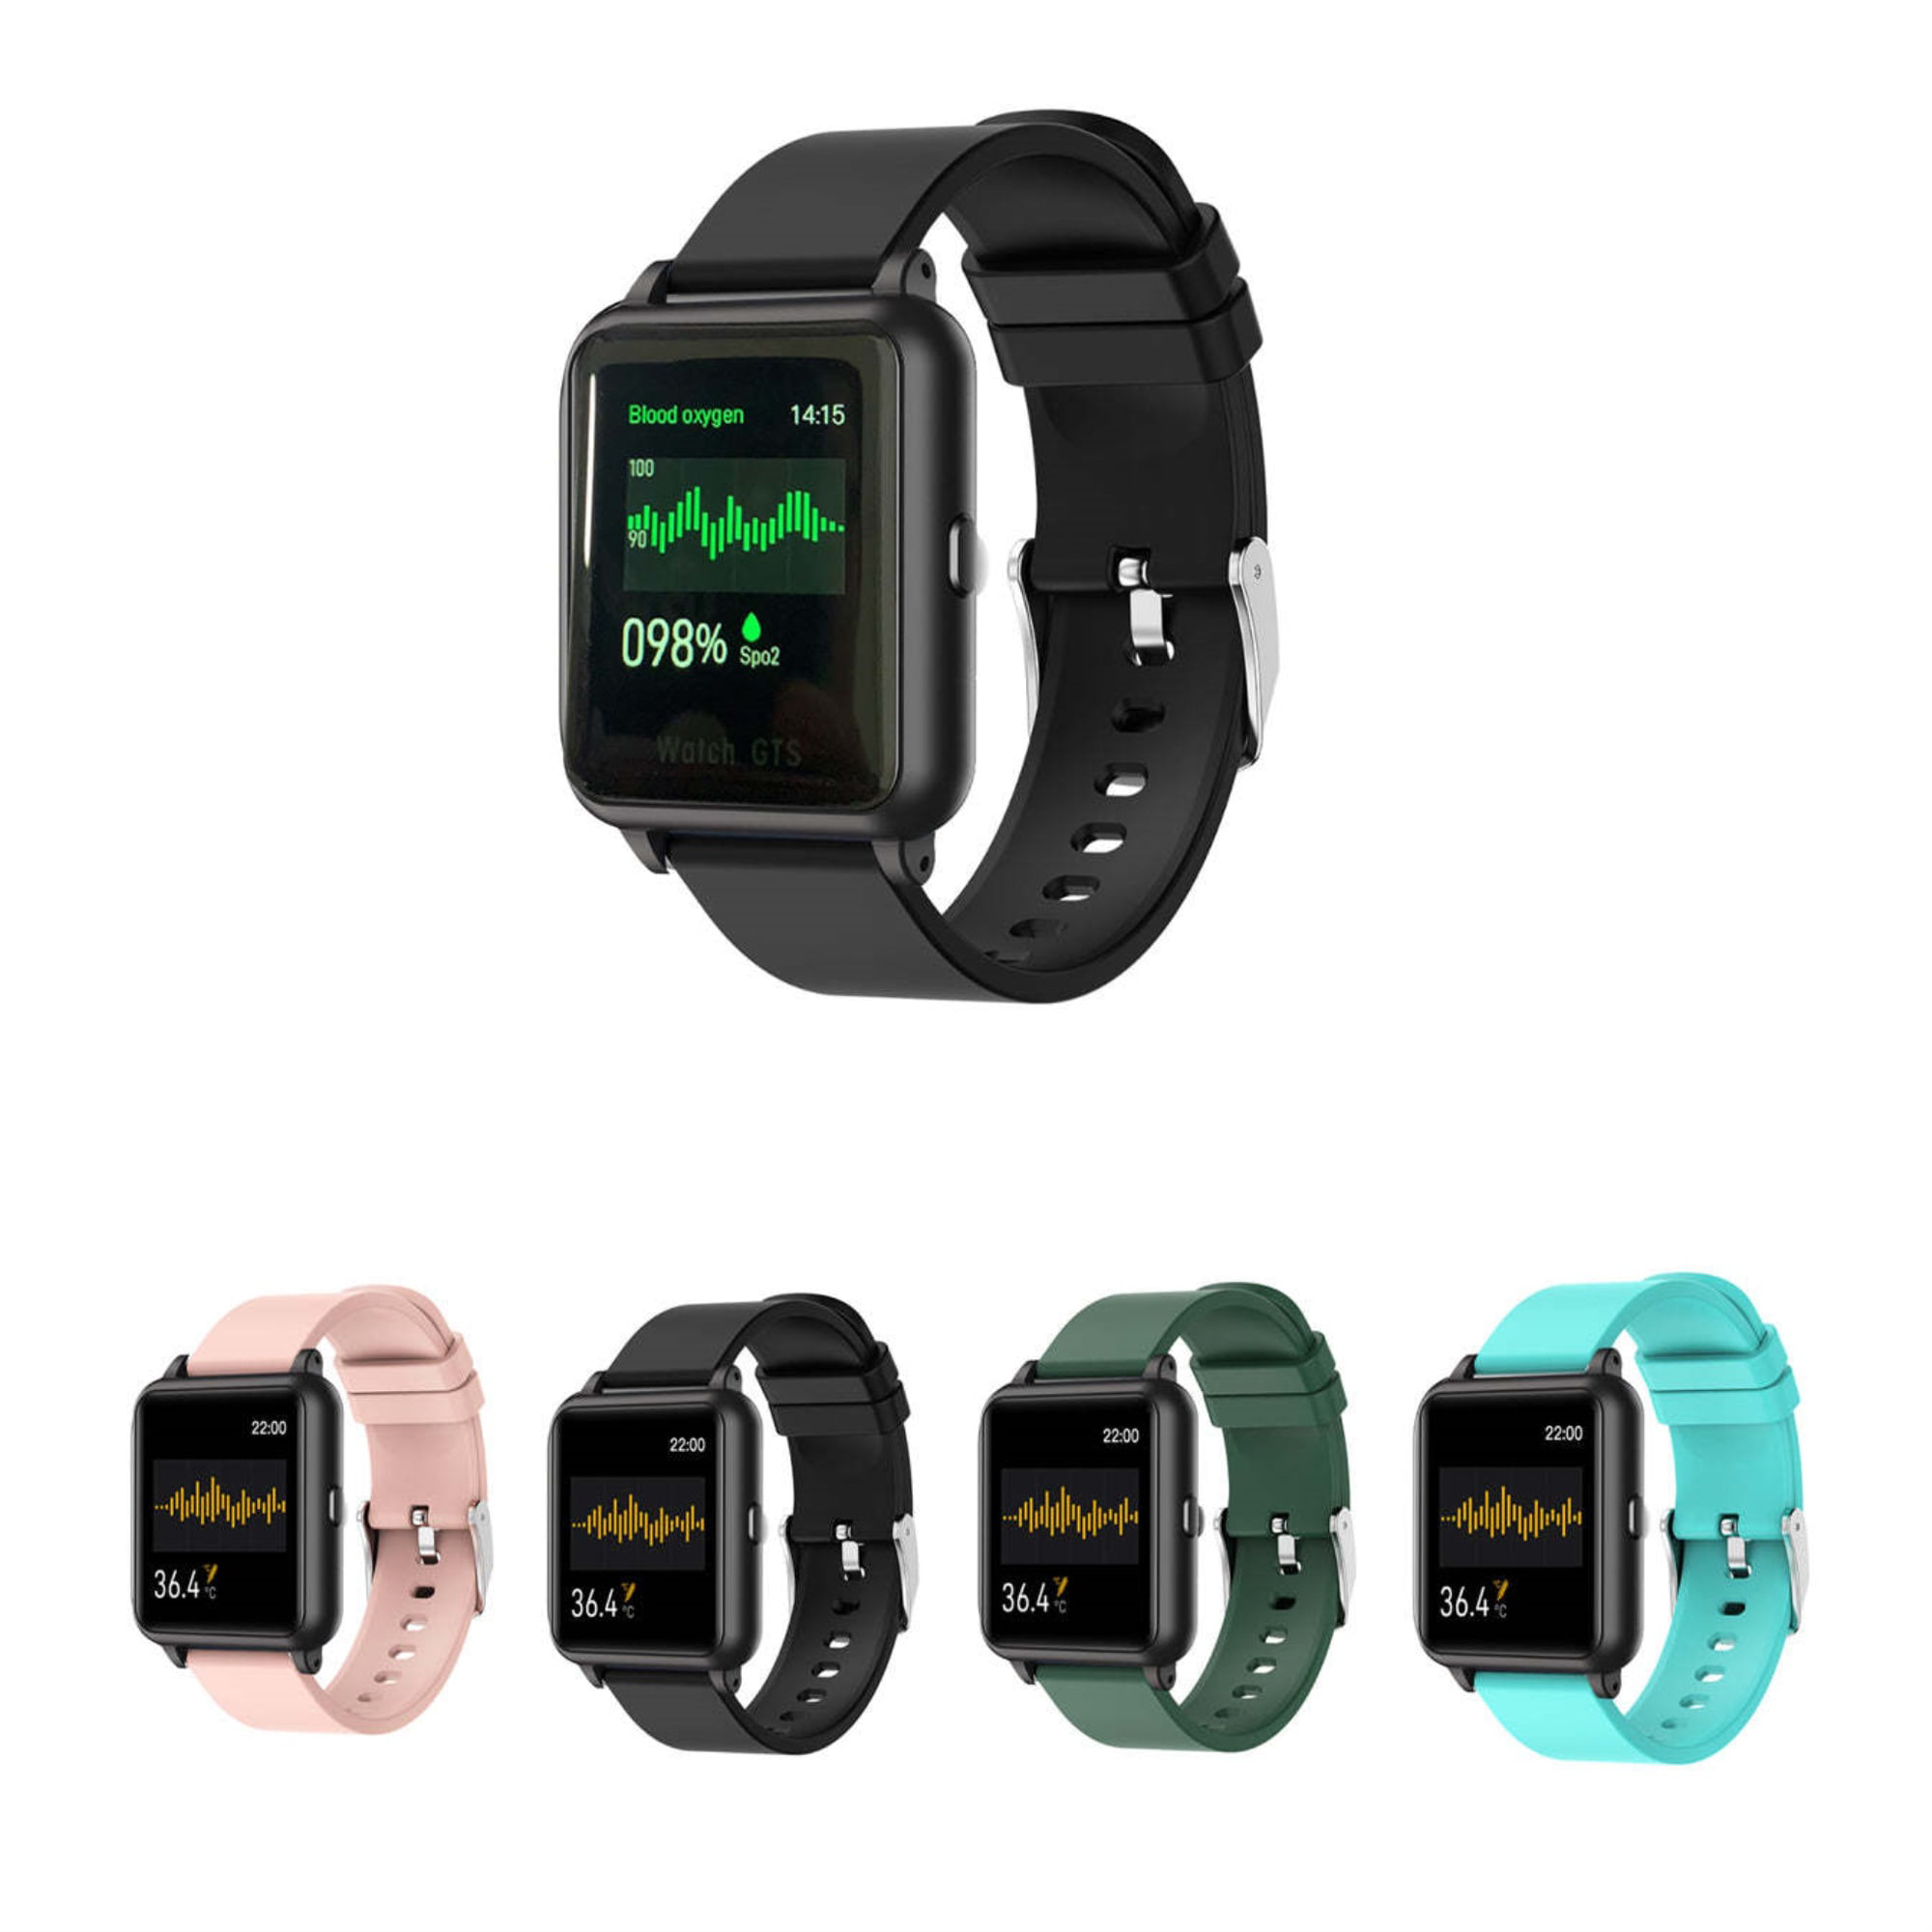 OXITEMP Smart Watch With Live Oximeter, Thermometer And Pulse Monitor With Tracker - Walmart.com